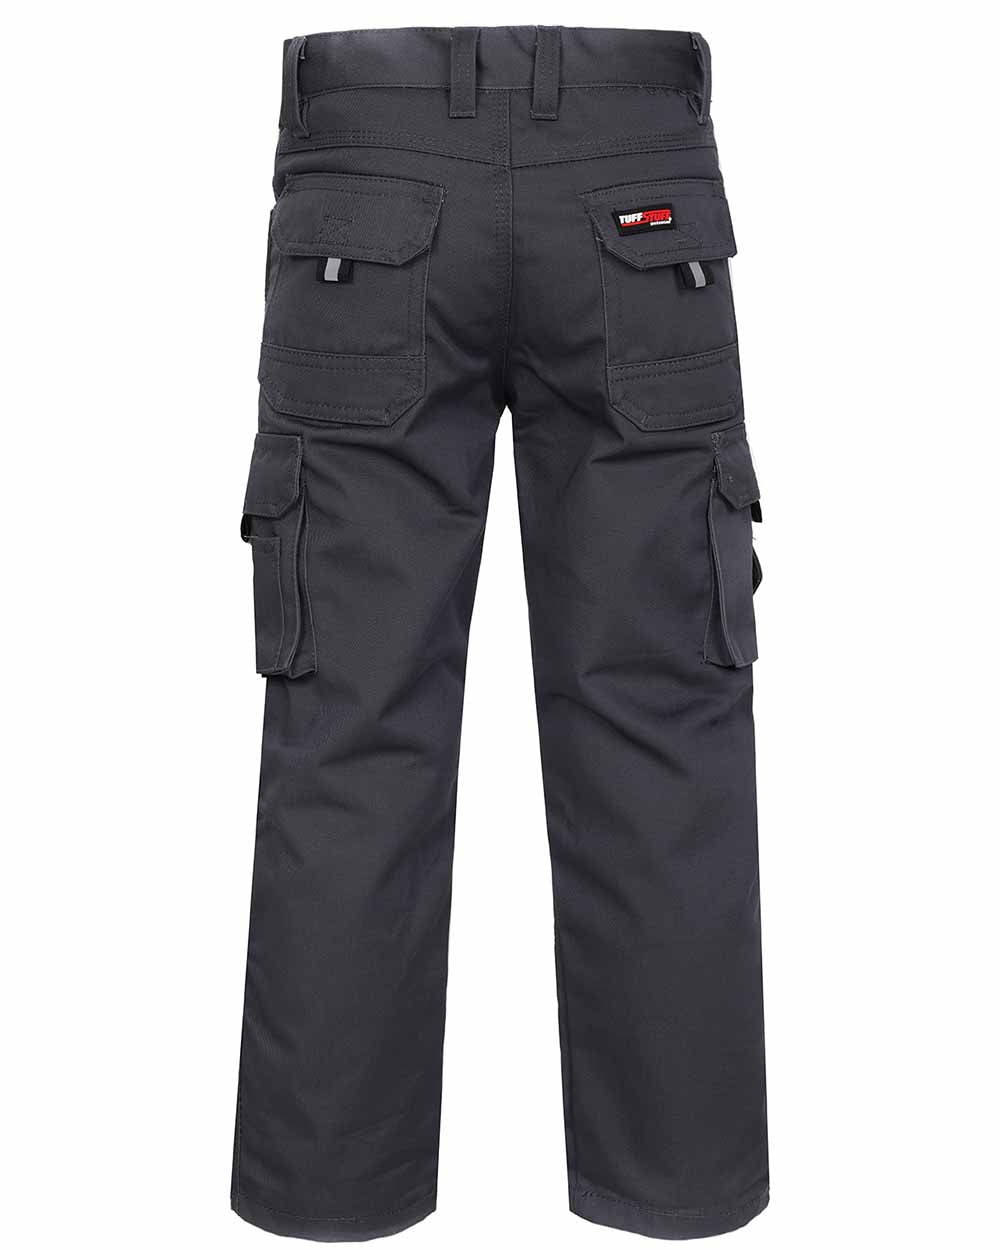 Back view showing cargo pockets TuffStuff Junior Pro Work Trousers in Grey 